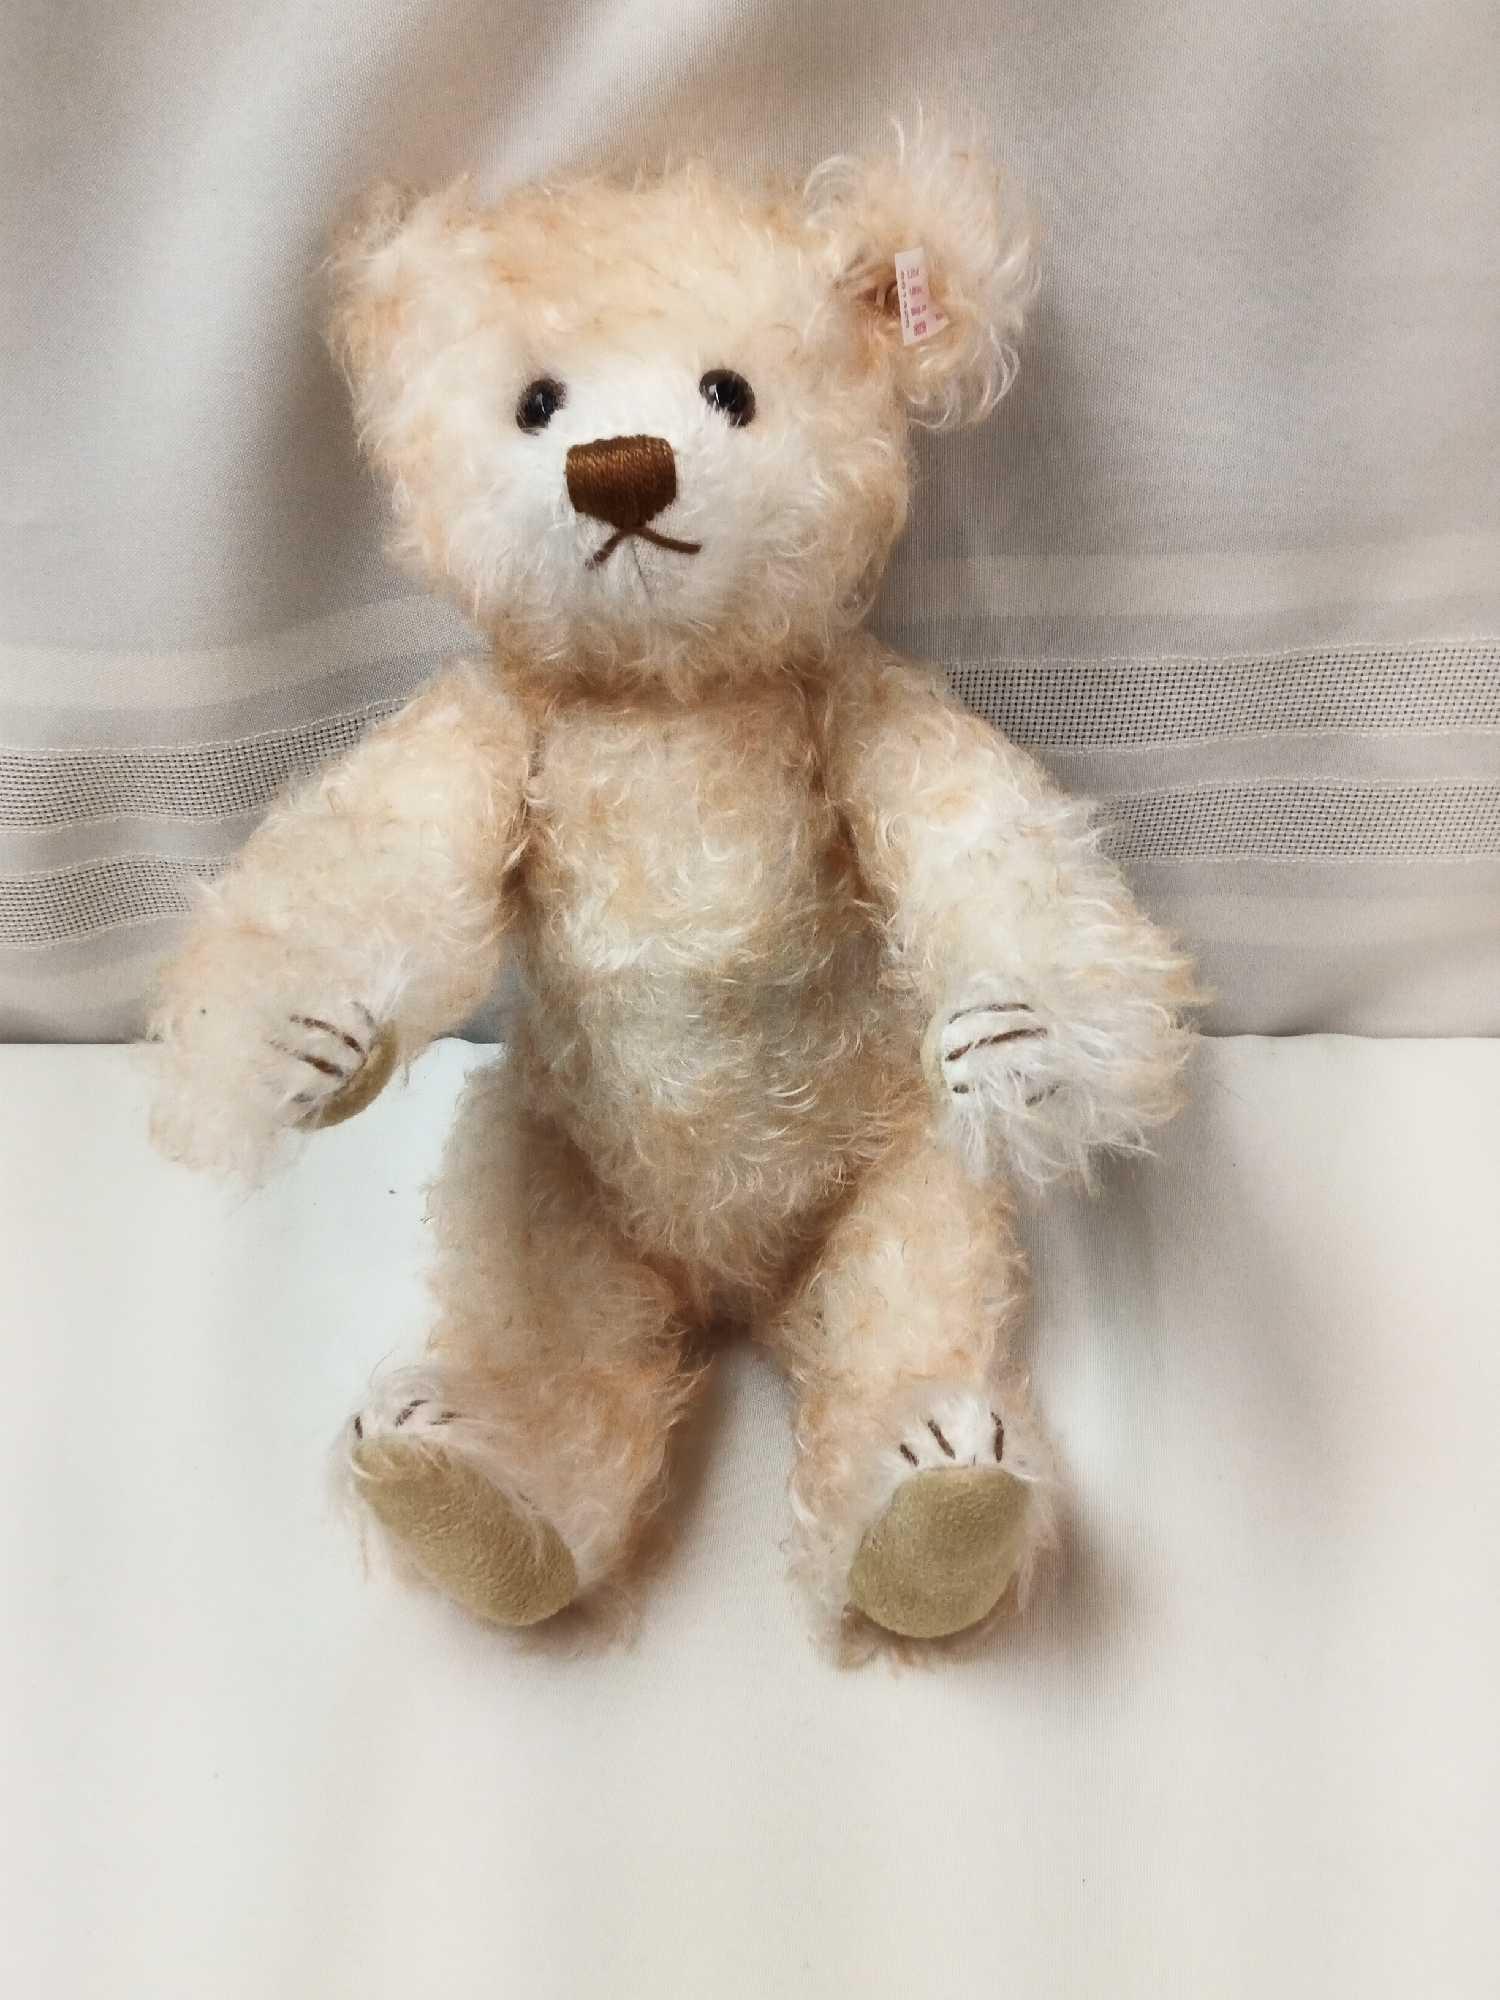 STIEFF BEAR. BUFF COLOR 12" DRESSED IN HOLLAND STYLE DRESS, CAP, AND WOODEN SHOES